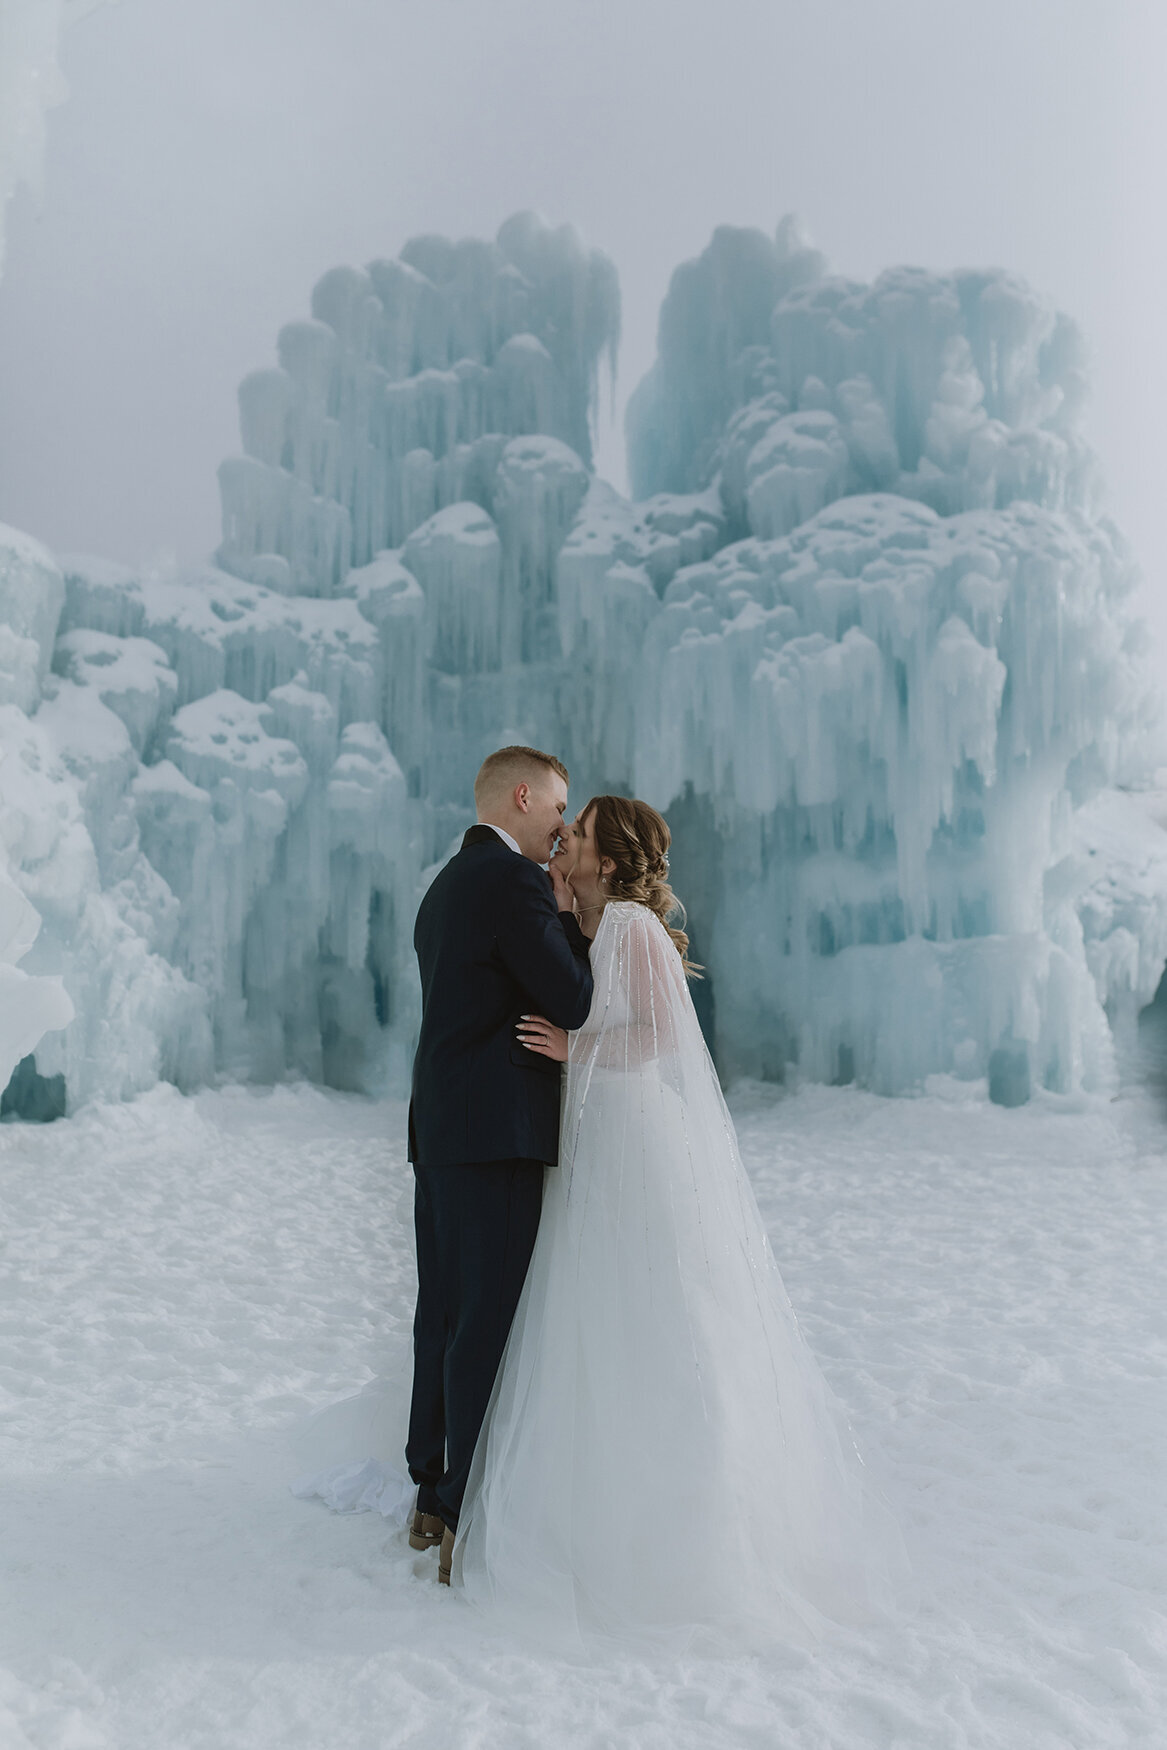 Bride and groom at the ice castles